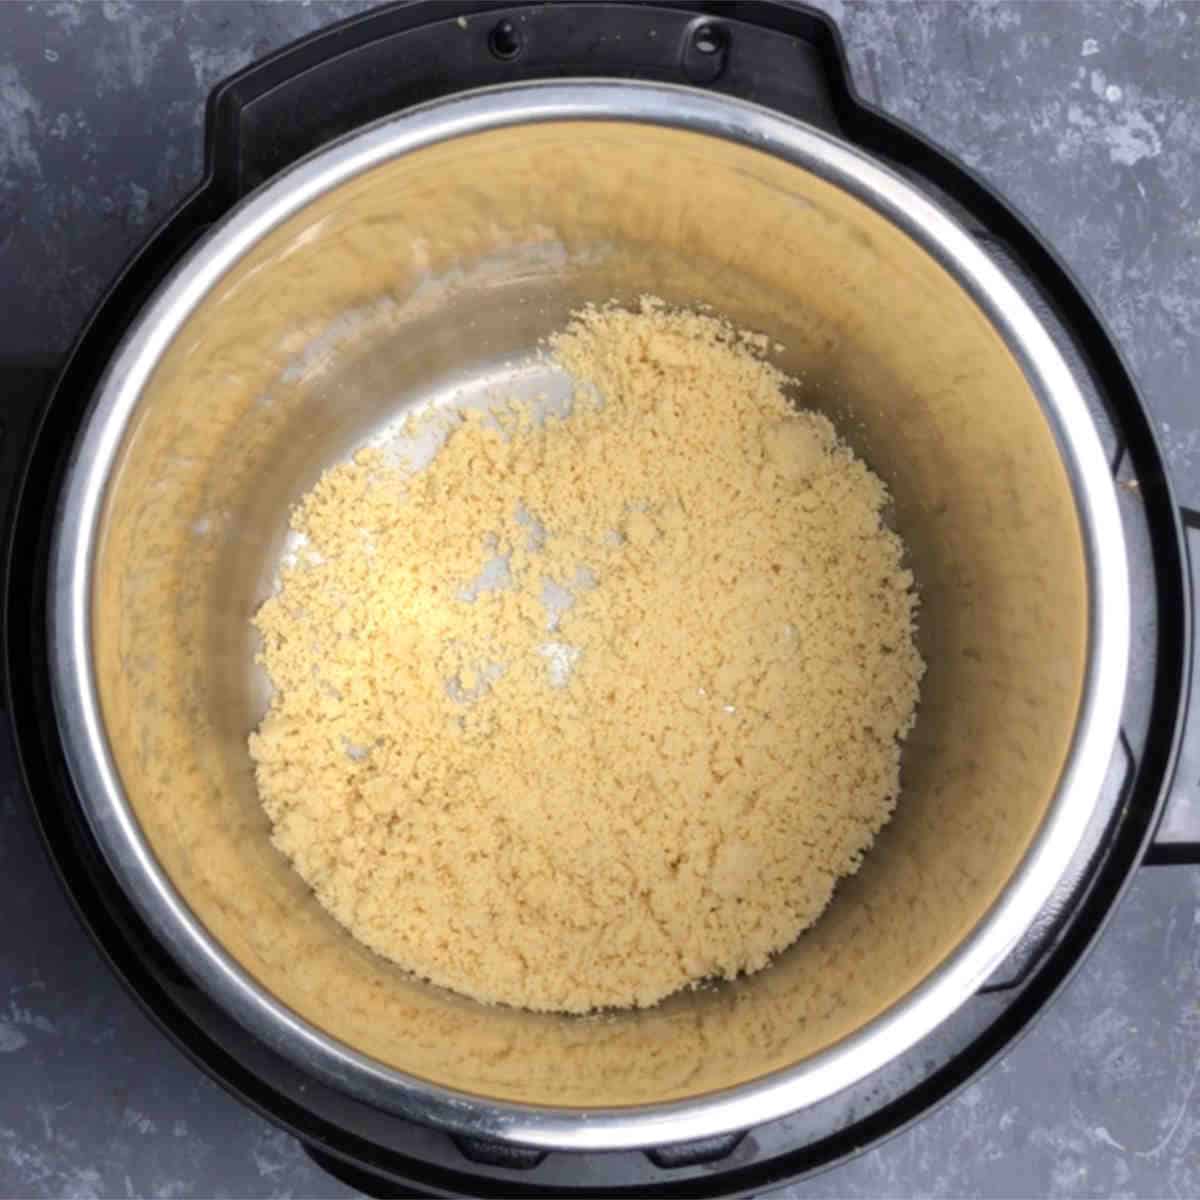 Add almond flour to Instant Pot and saute 2 minutes with little ghee.